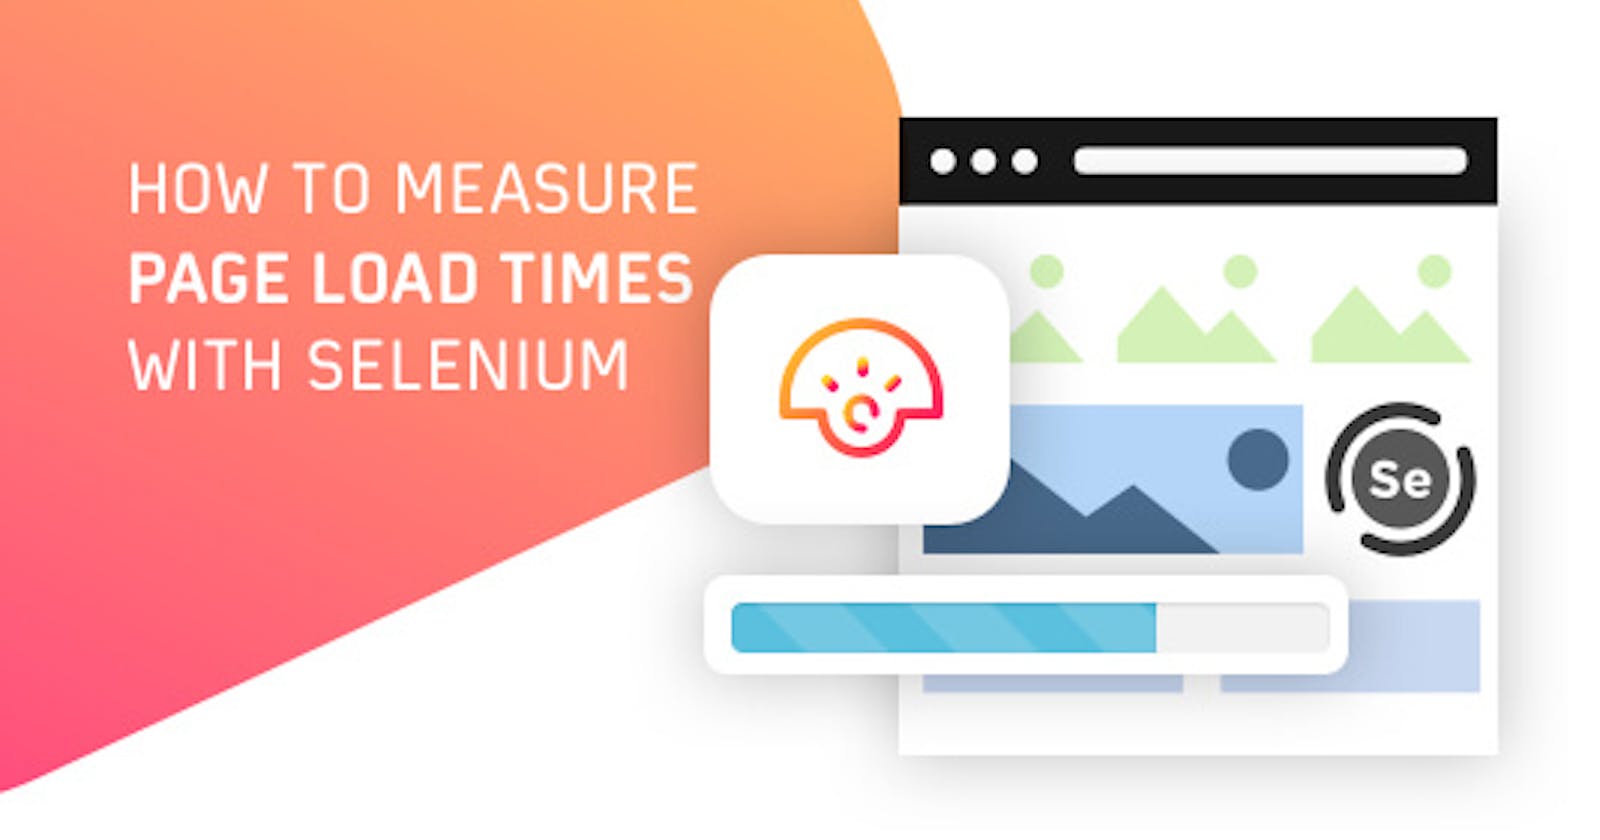 How To Measure Page Load Times With Selenium?